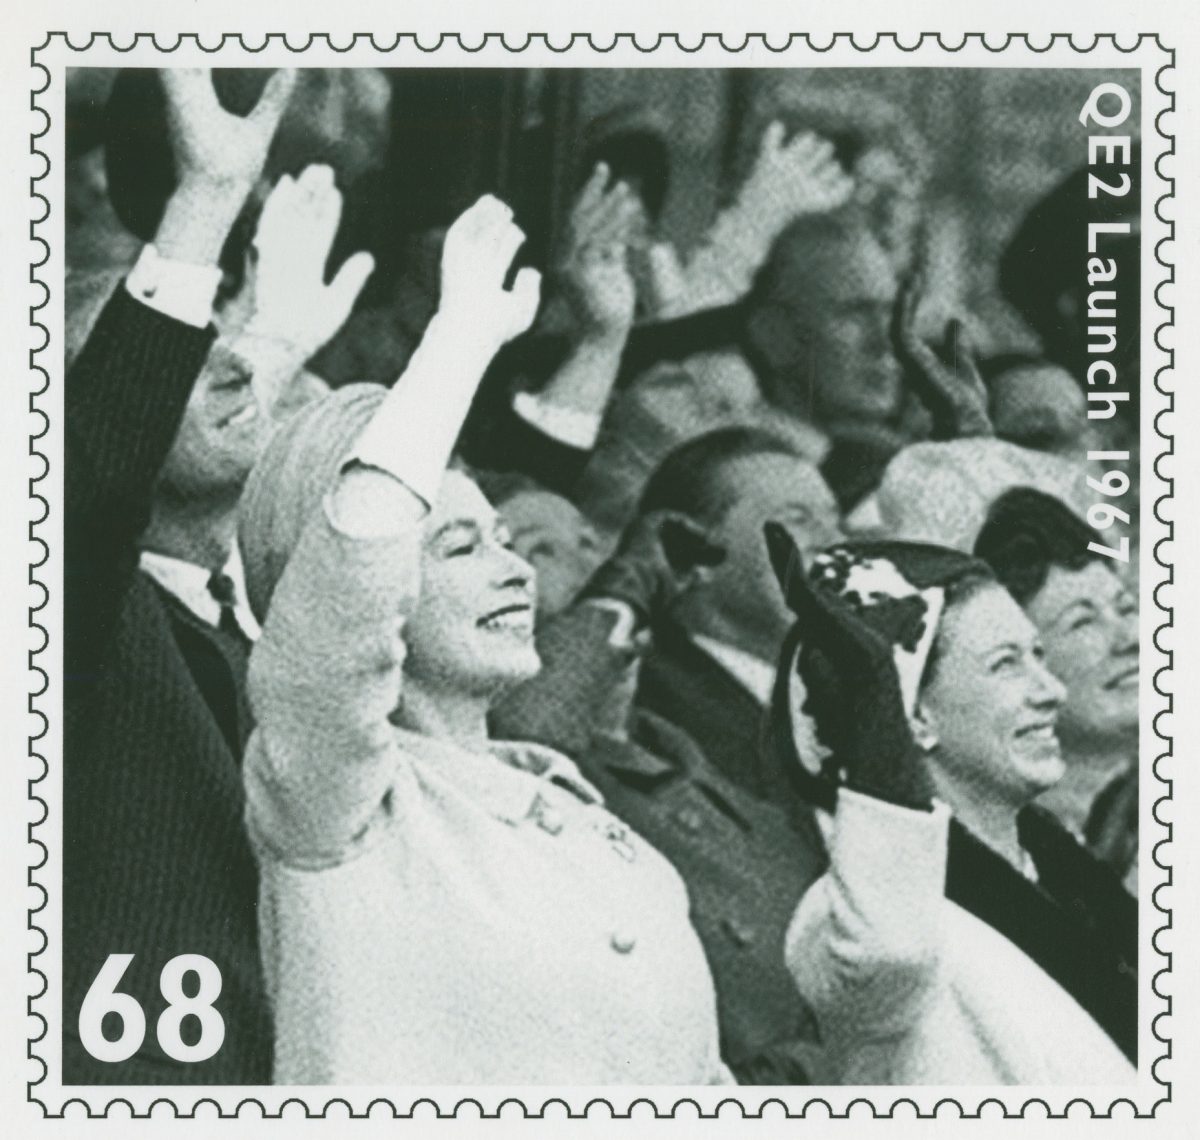 Black and white image of Queen Elizabeth II waving surrounded by others doing the same. 